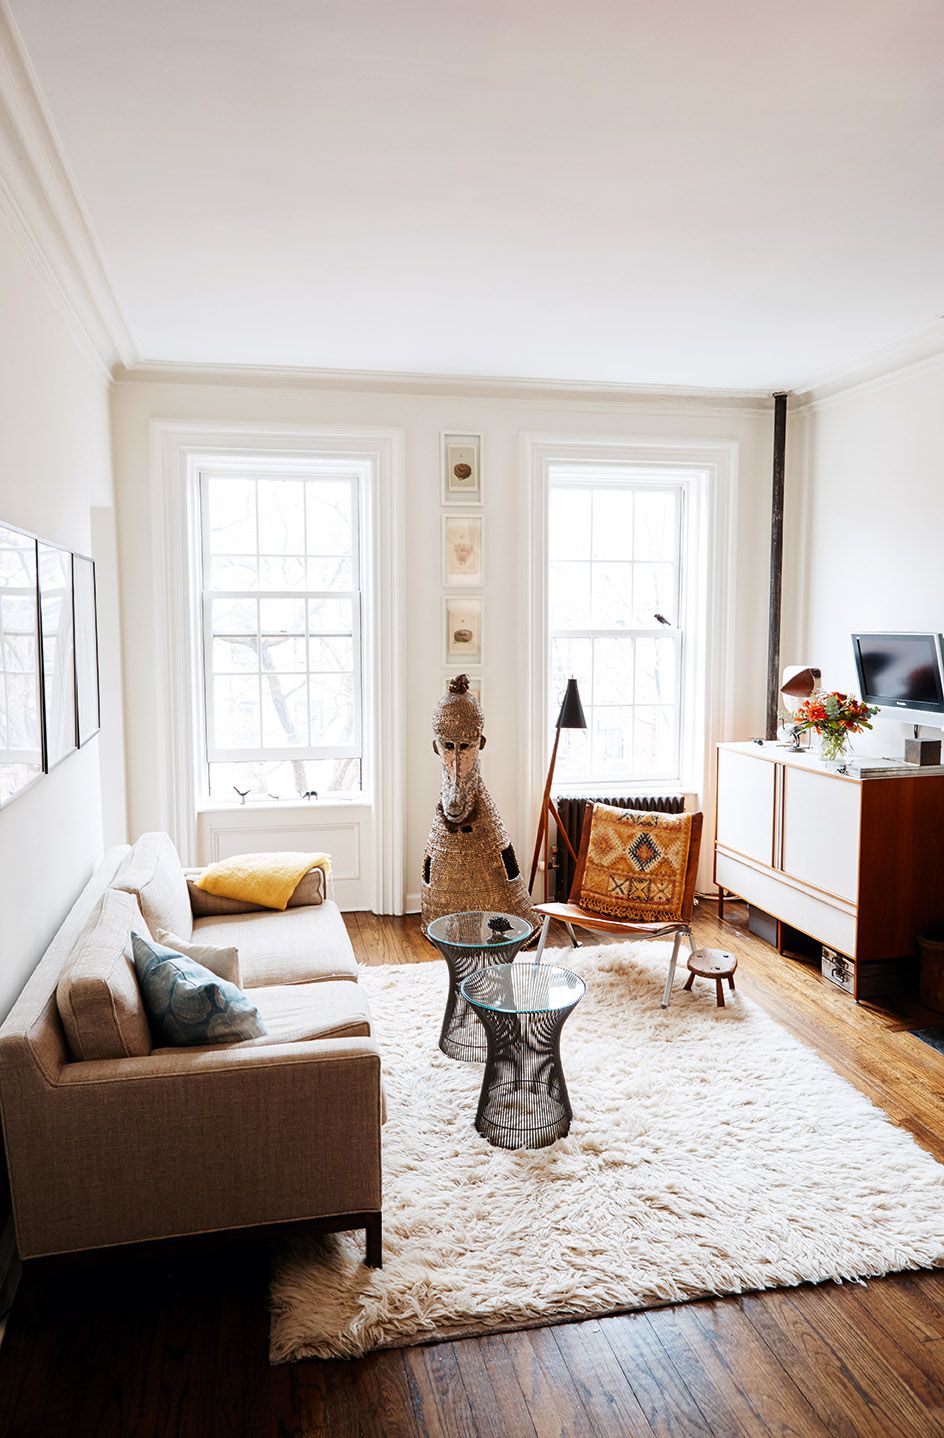 11 Expert Tricks for Making a Small Room Look Bigger